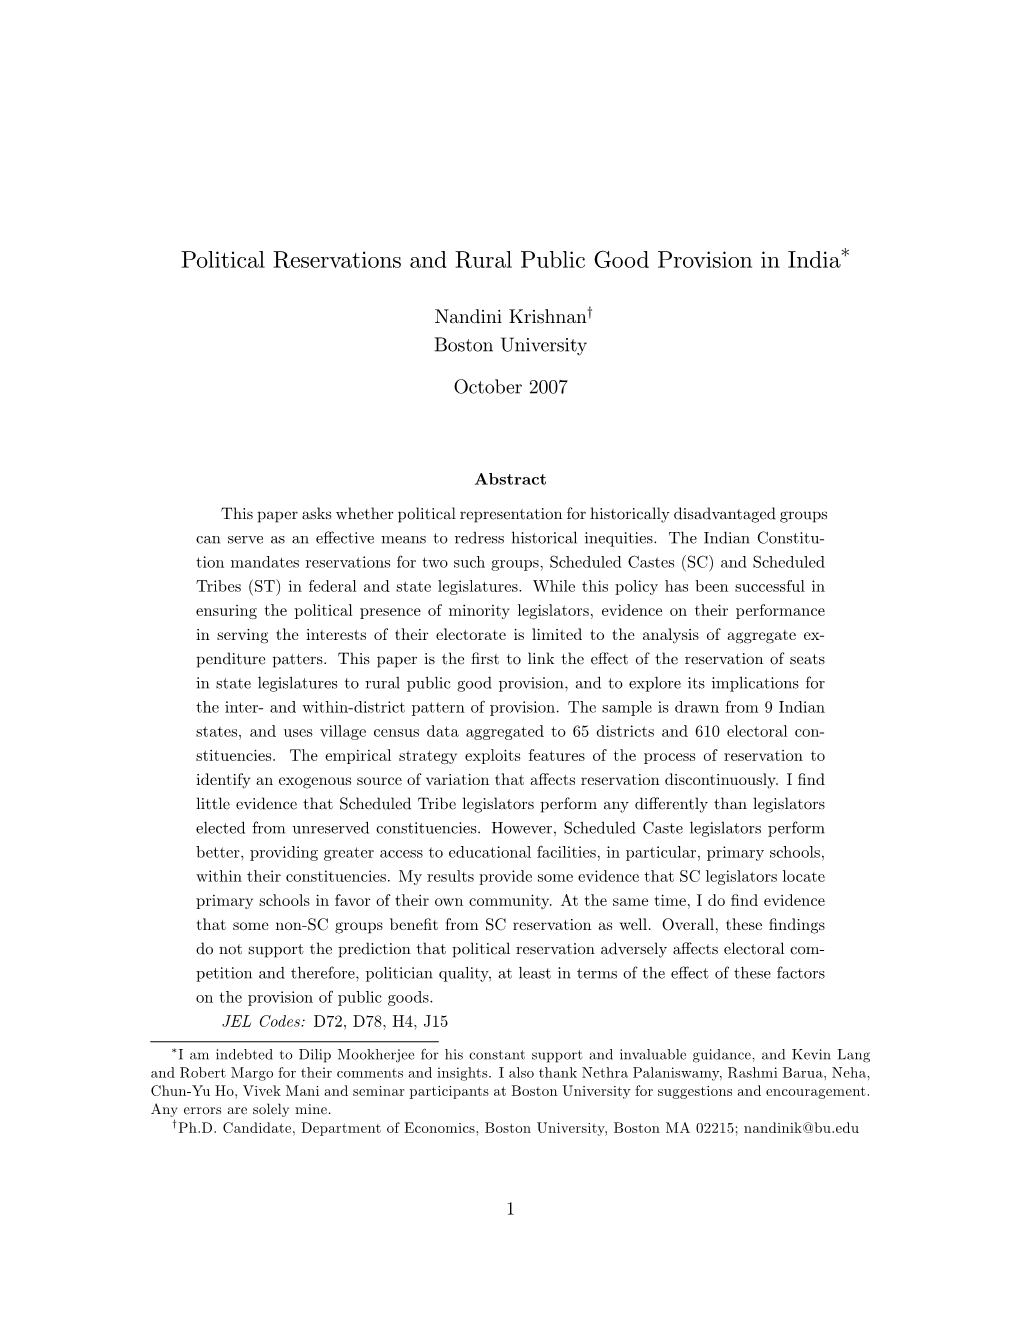 Political Reservations and Rural Public Good Provision in India By